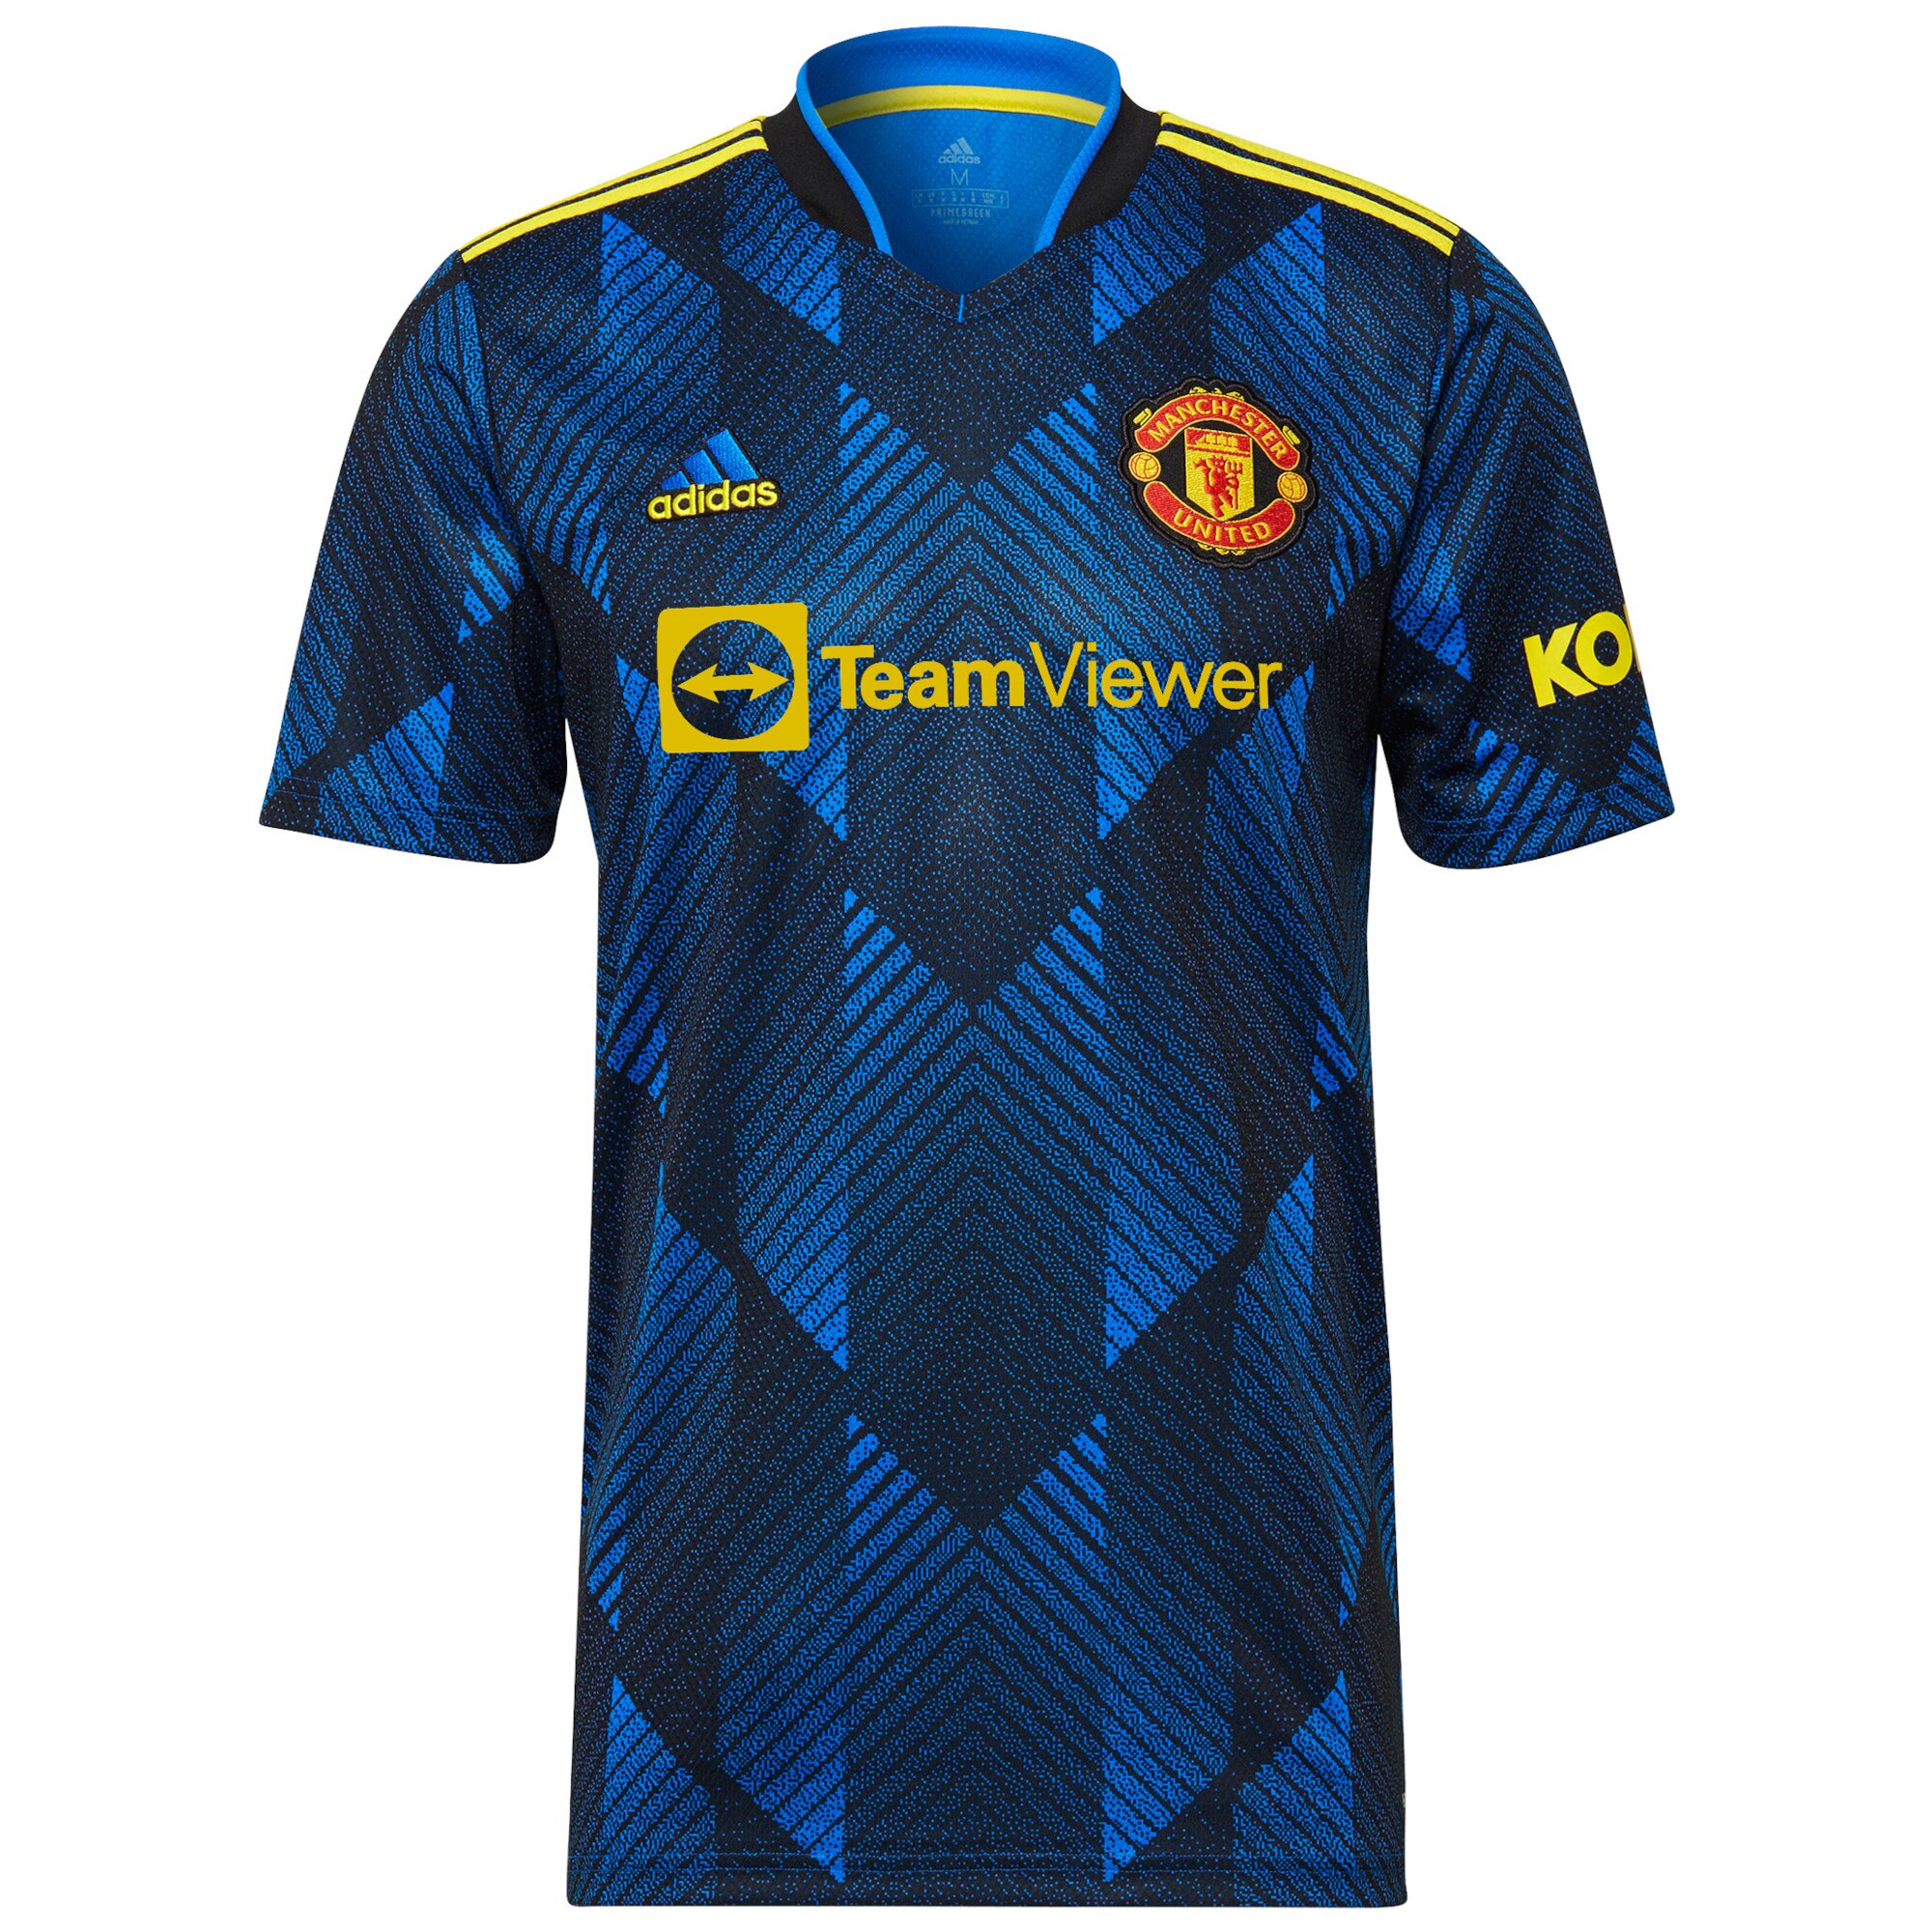 Manchester United Cup Third Shirt 2021-22 with Toone 7 printing